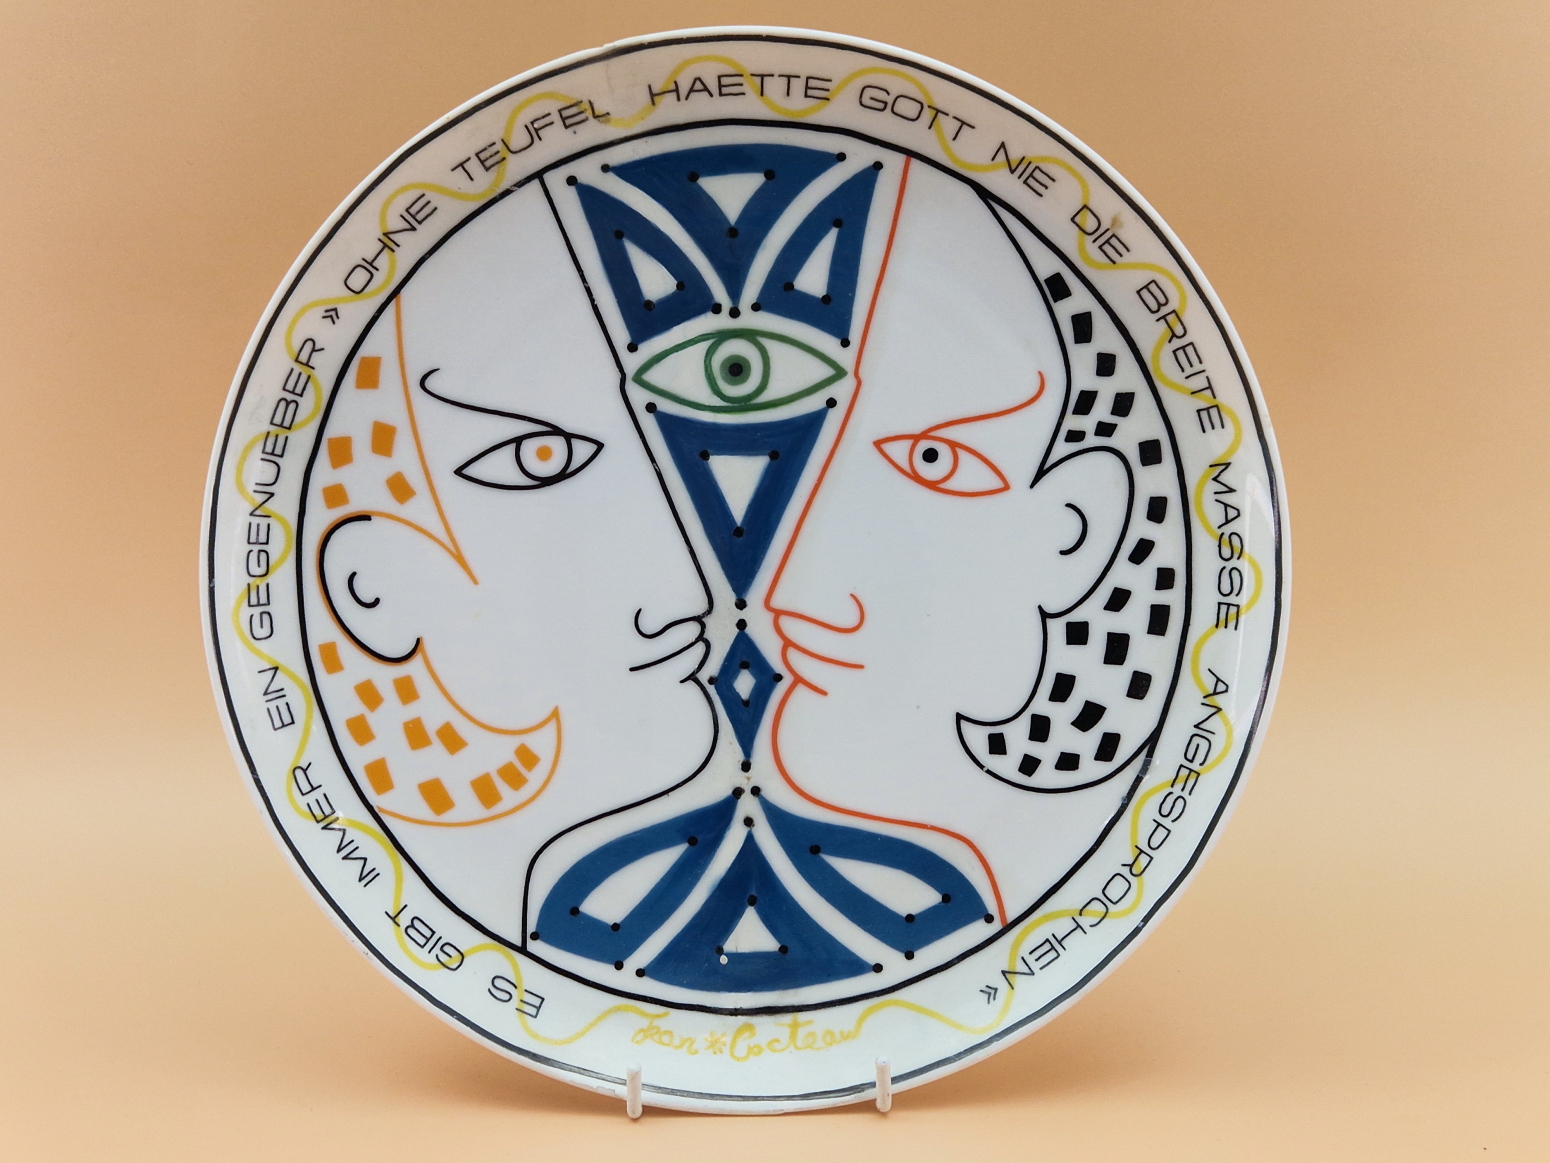 A ROSENTHAL JEAN COCTEAU PLATE, A PORCELAIN JUG WITH A CAT HANDLE, A WEDGWOOD AND A MINTON TEA POT. - Image 2 of 10